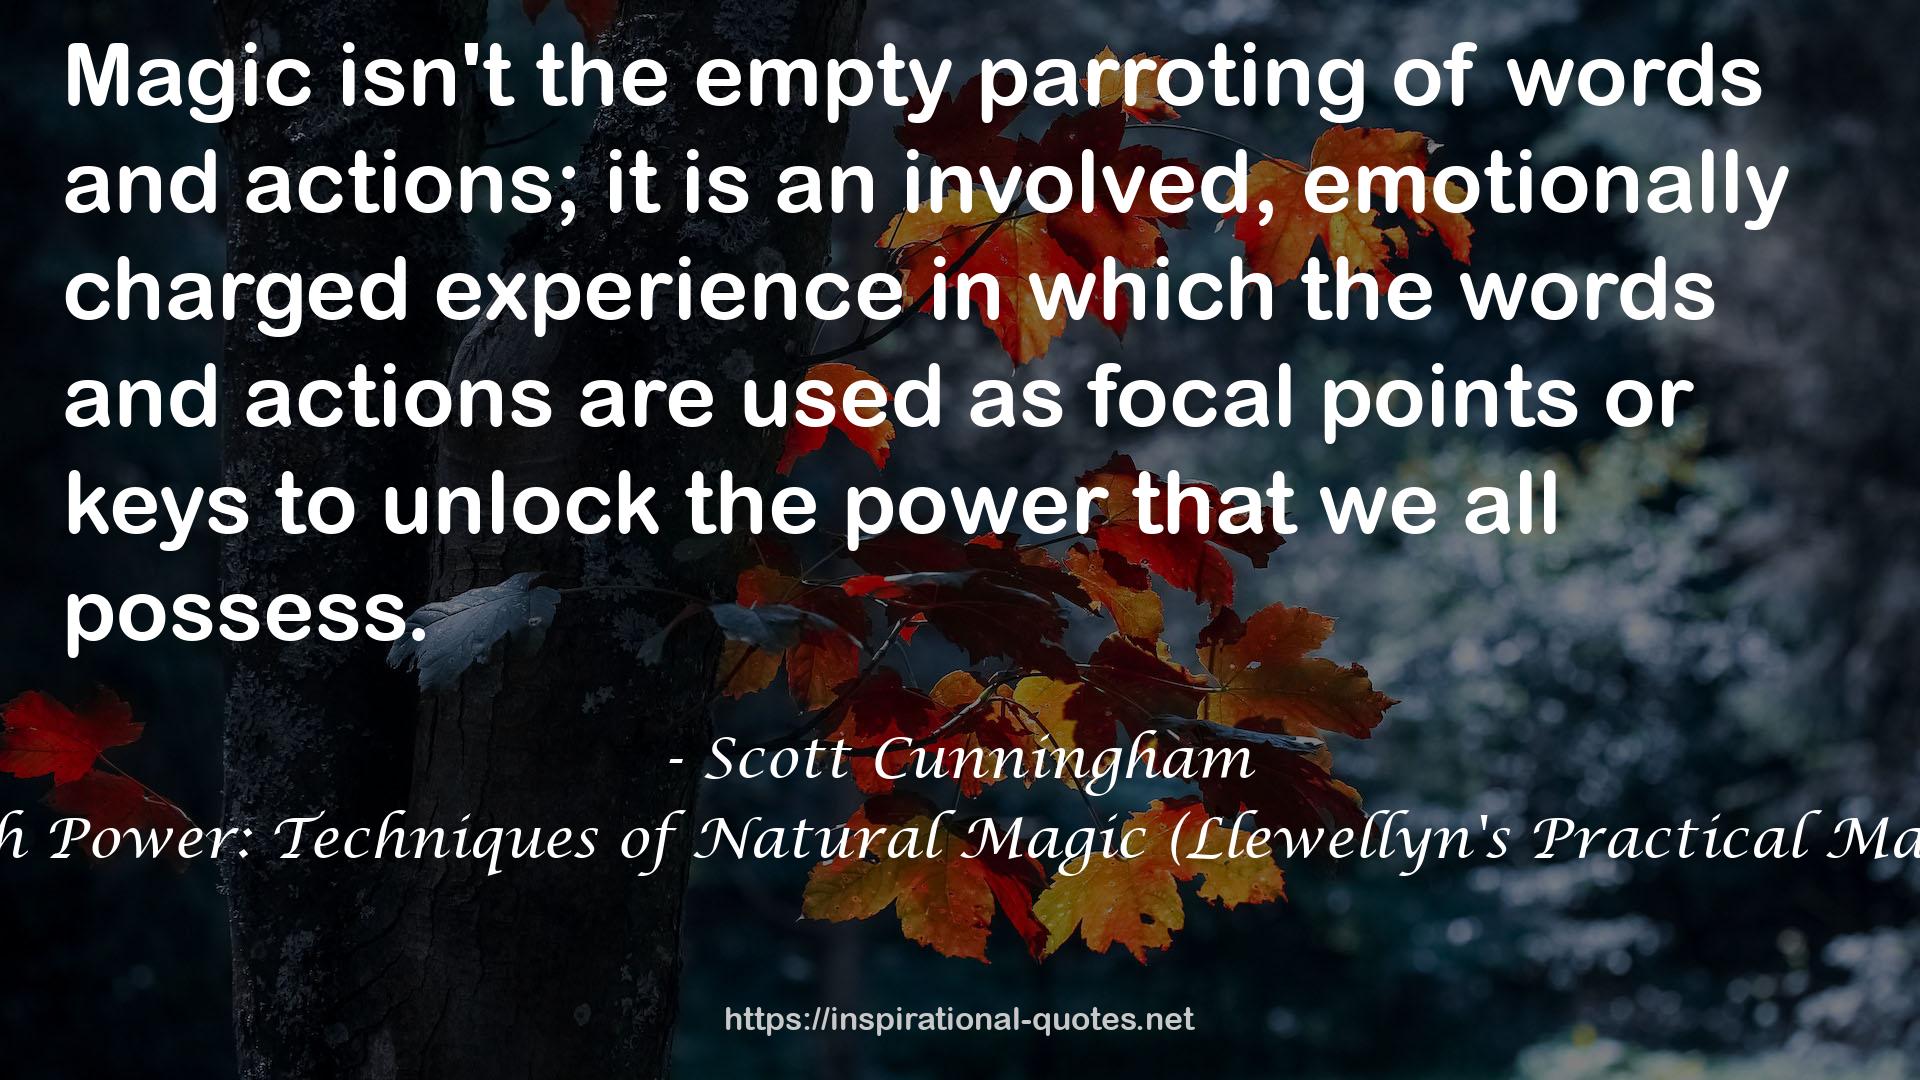 Earth Power: Techniques of Natural Magic (Llewellyn's Practical Magick) QUOTES